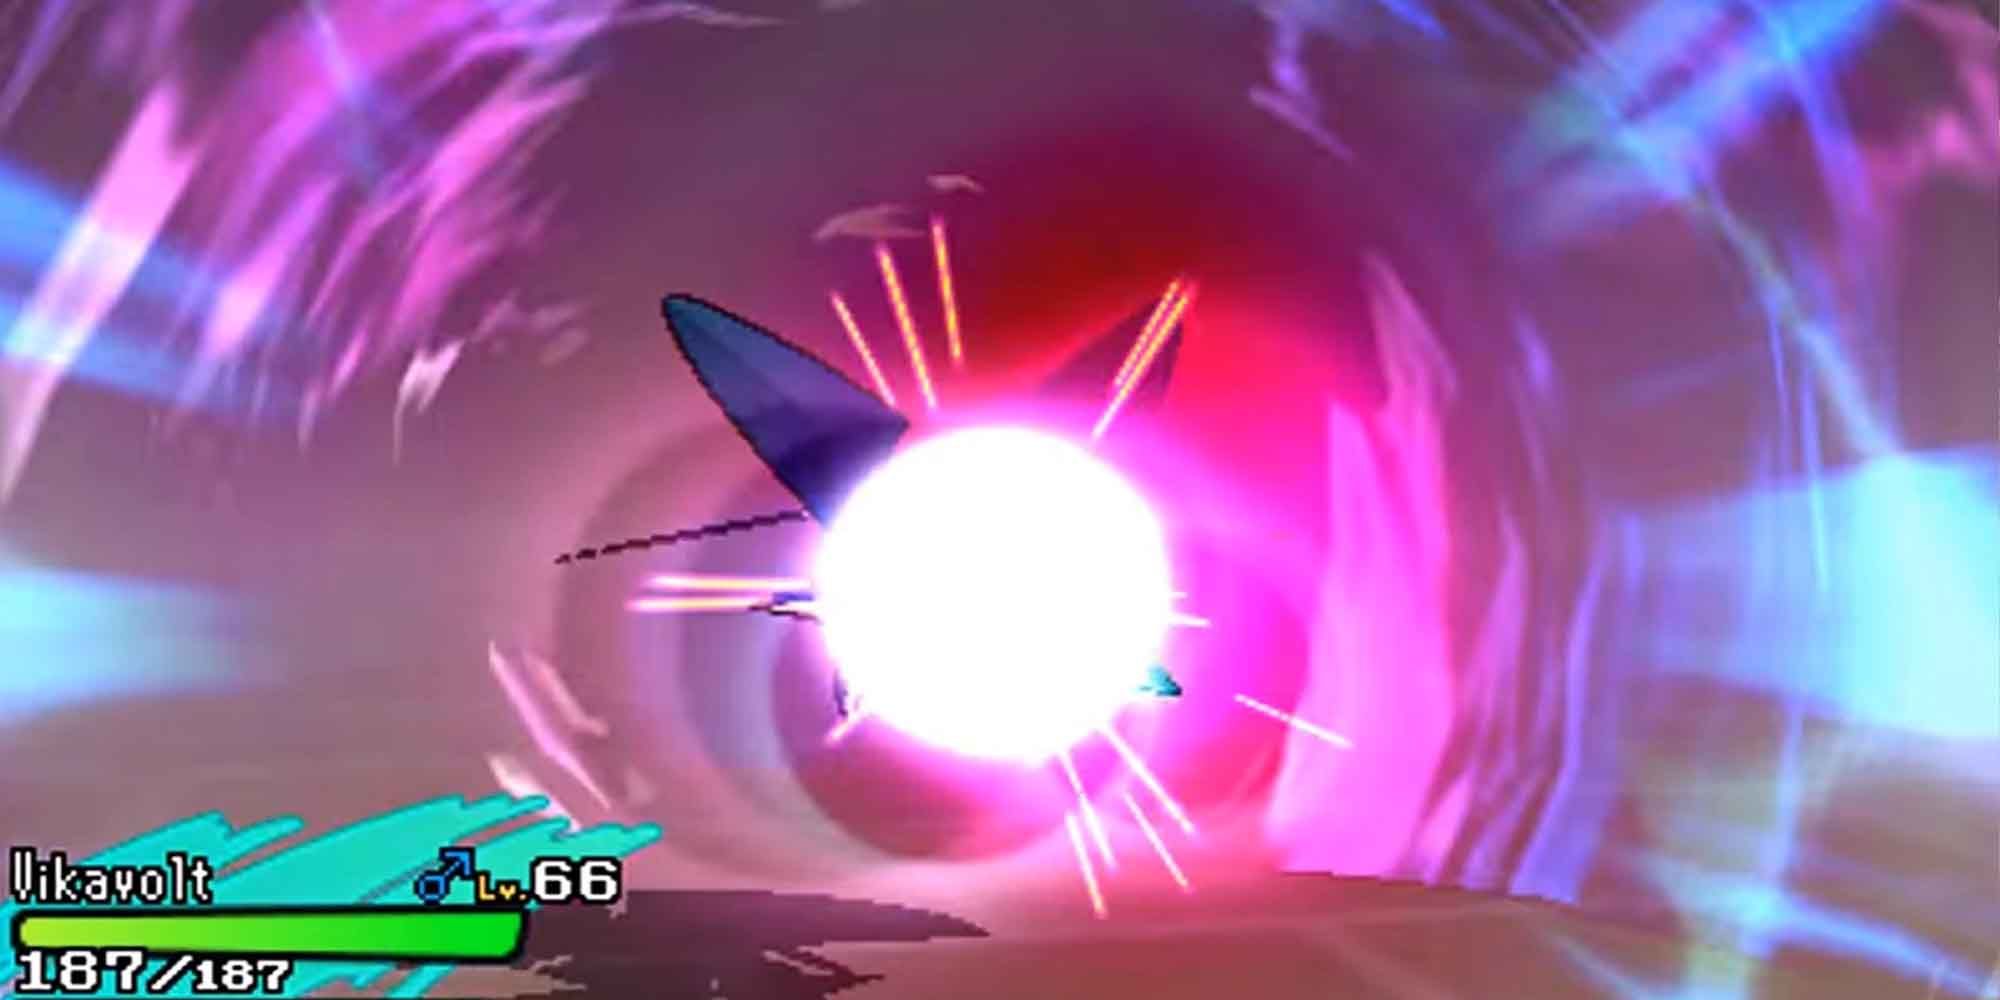 Psychic being used on Vikavolt in Pokemon